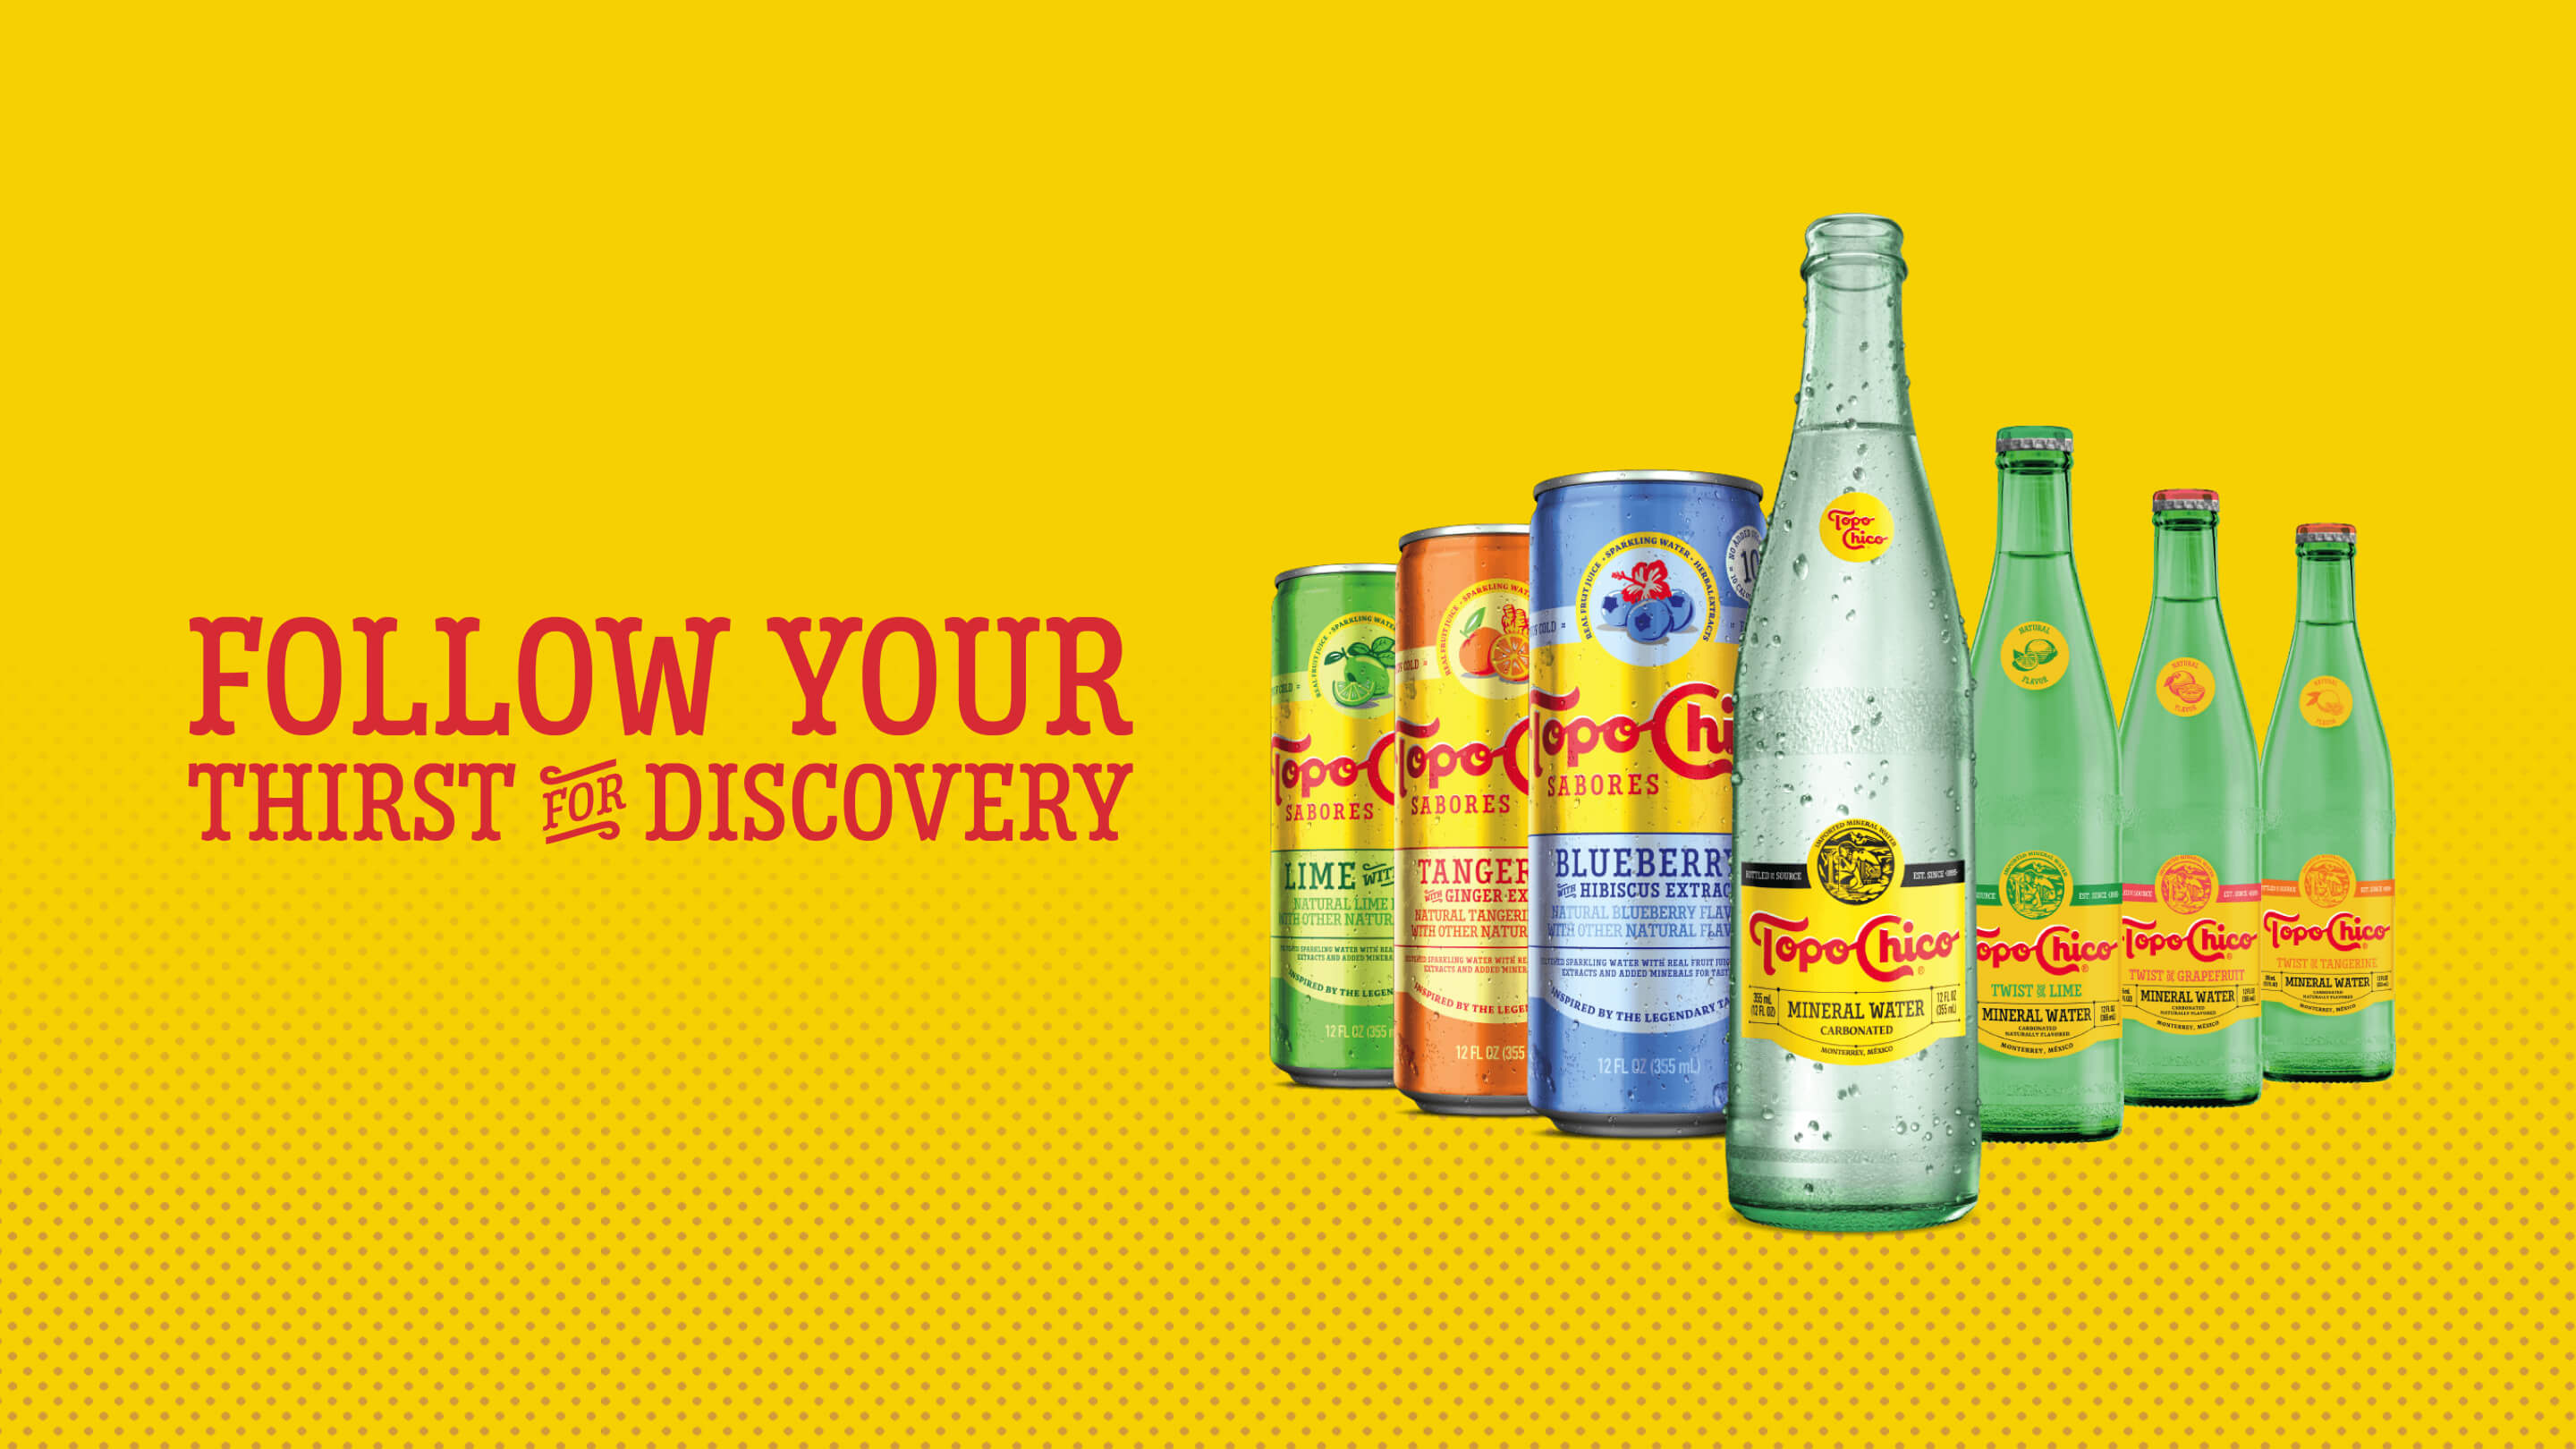 Topo Chico ad with three cans in a blue background with the phrase "Flavors that just sip different"